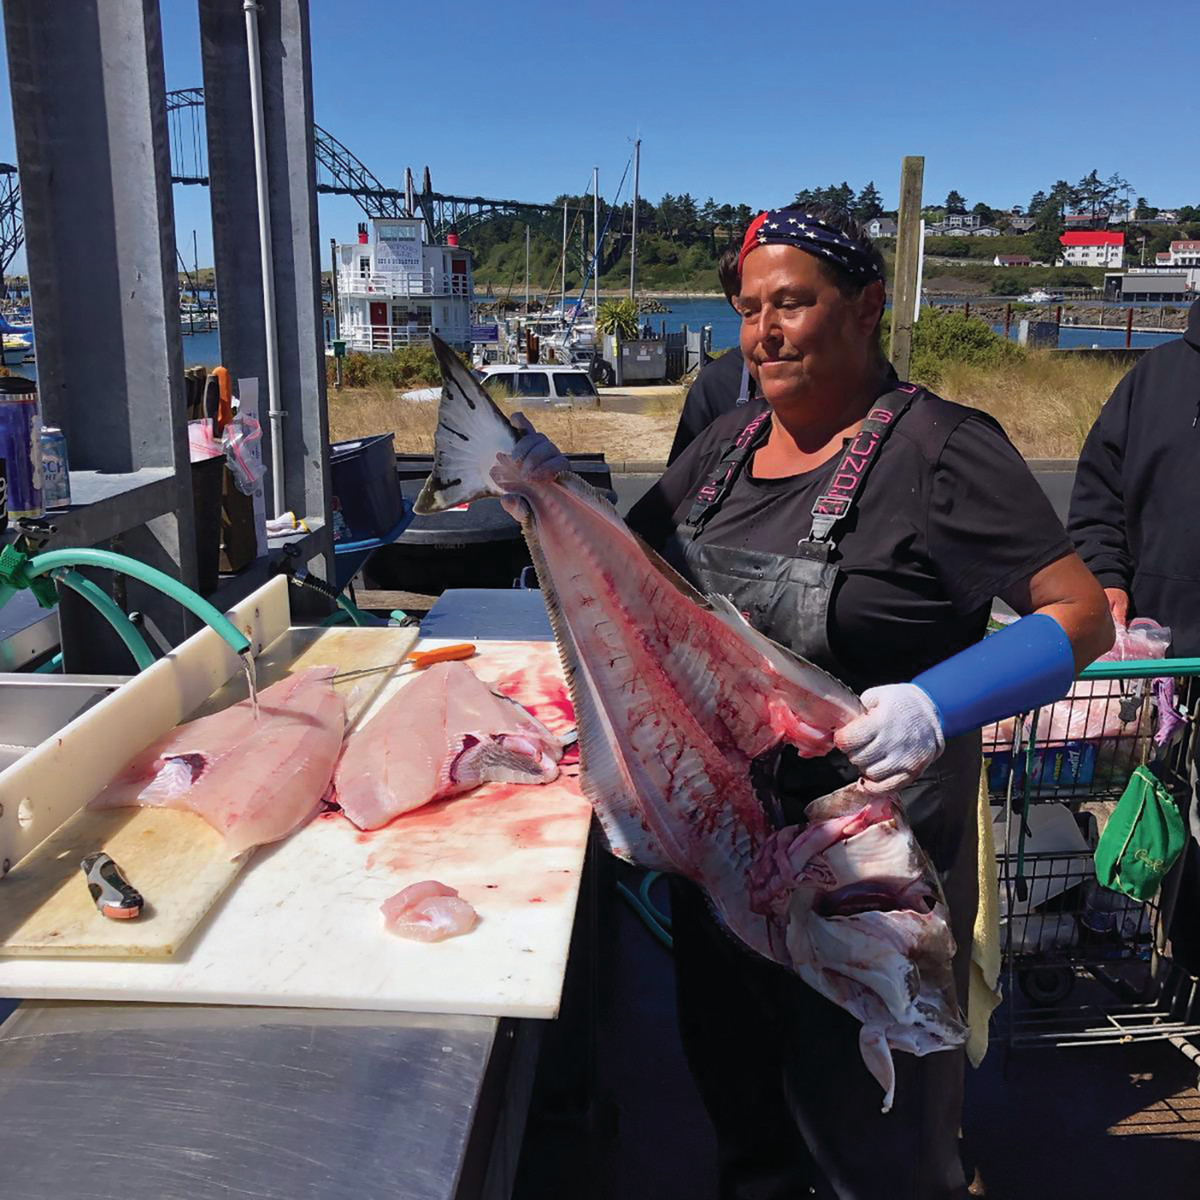 Vella made quick work of this nice Pacific halibut with her skilled hands and trusty fillet knife. 